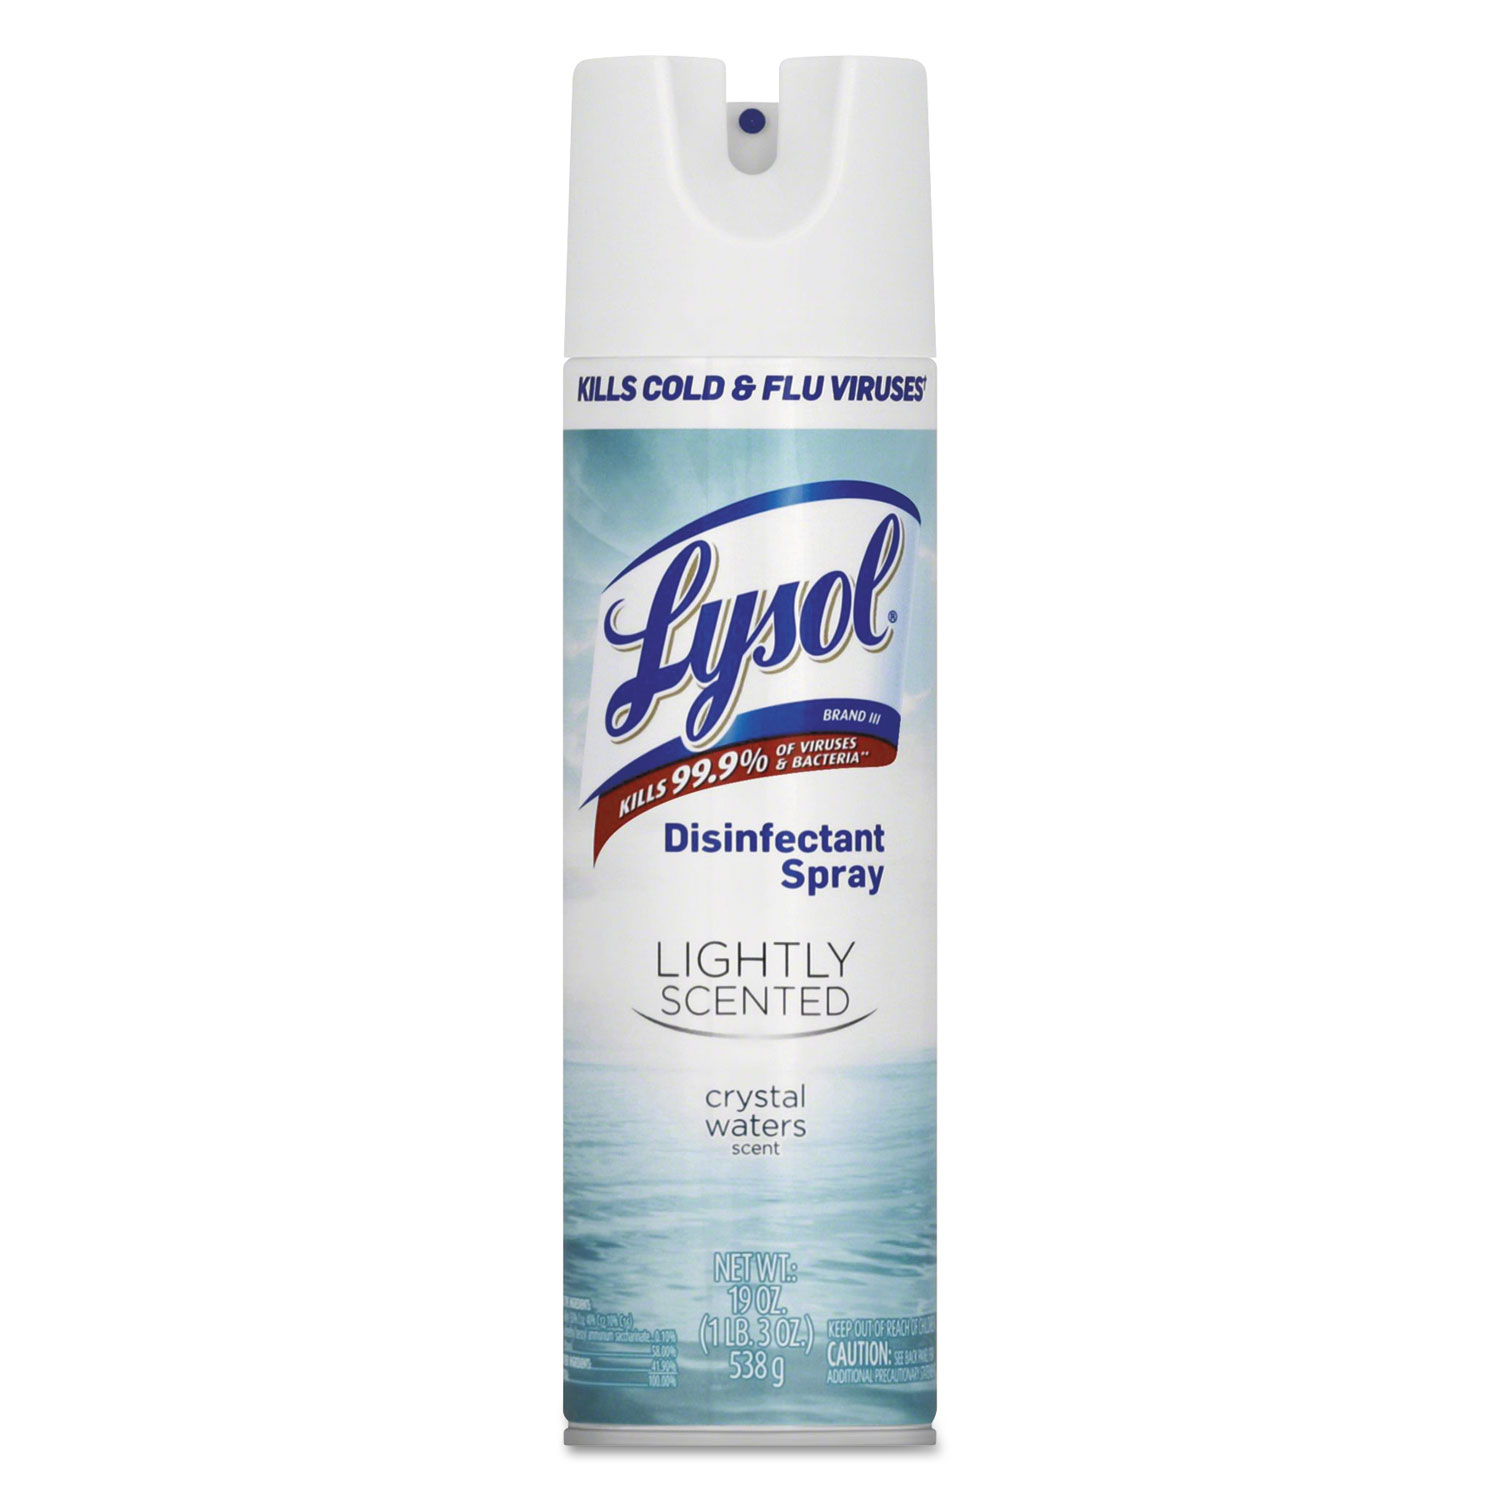 Lightly Scented Disinfectant Spray, Crystal Waters, 19 oz, 6/Carton